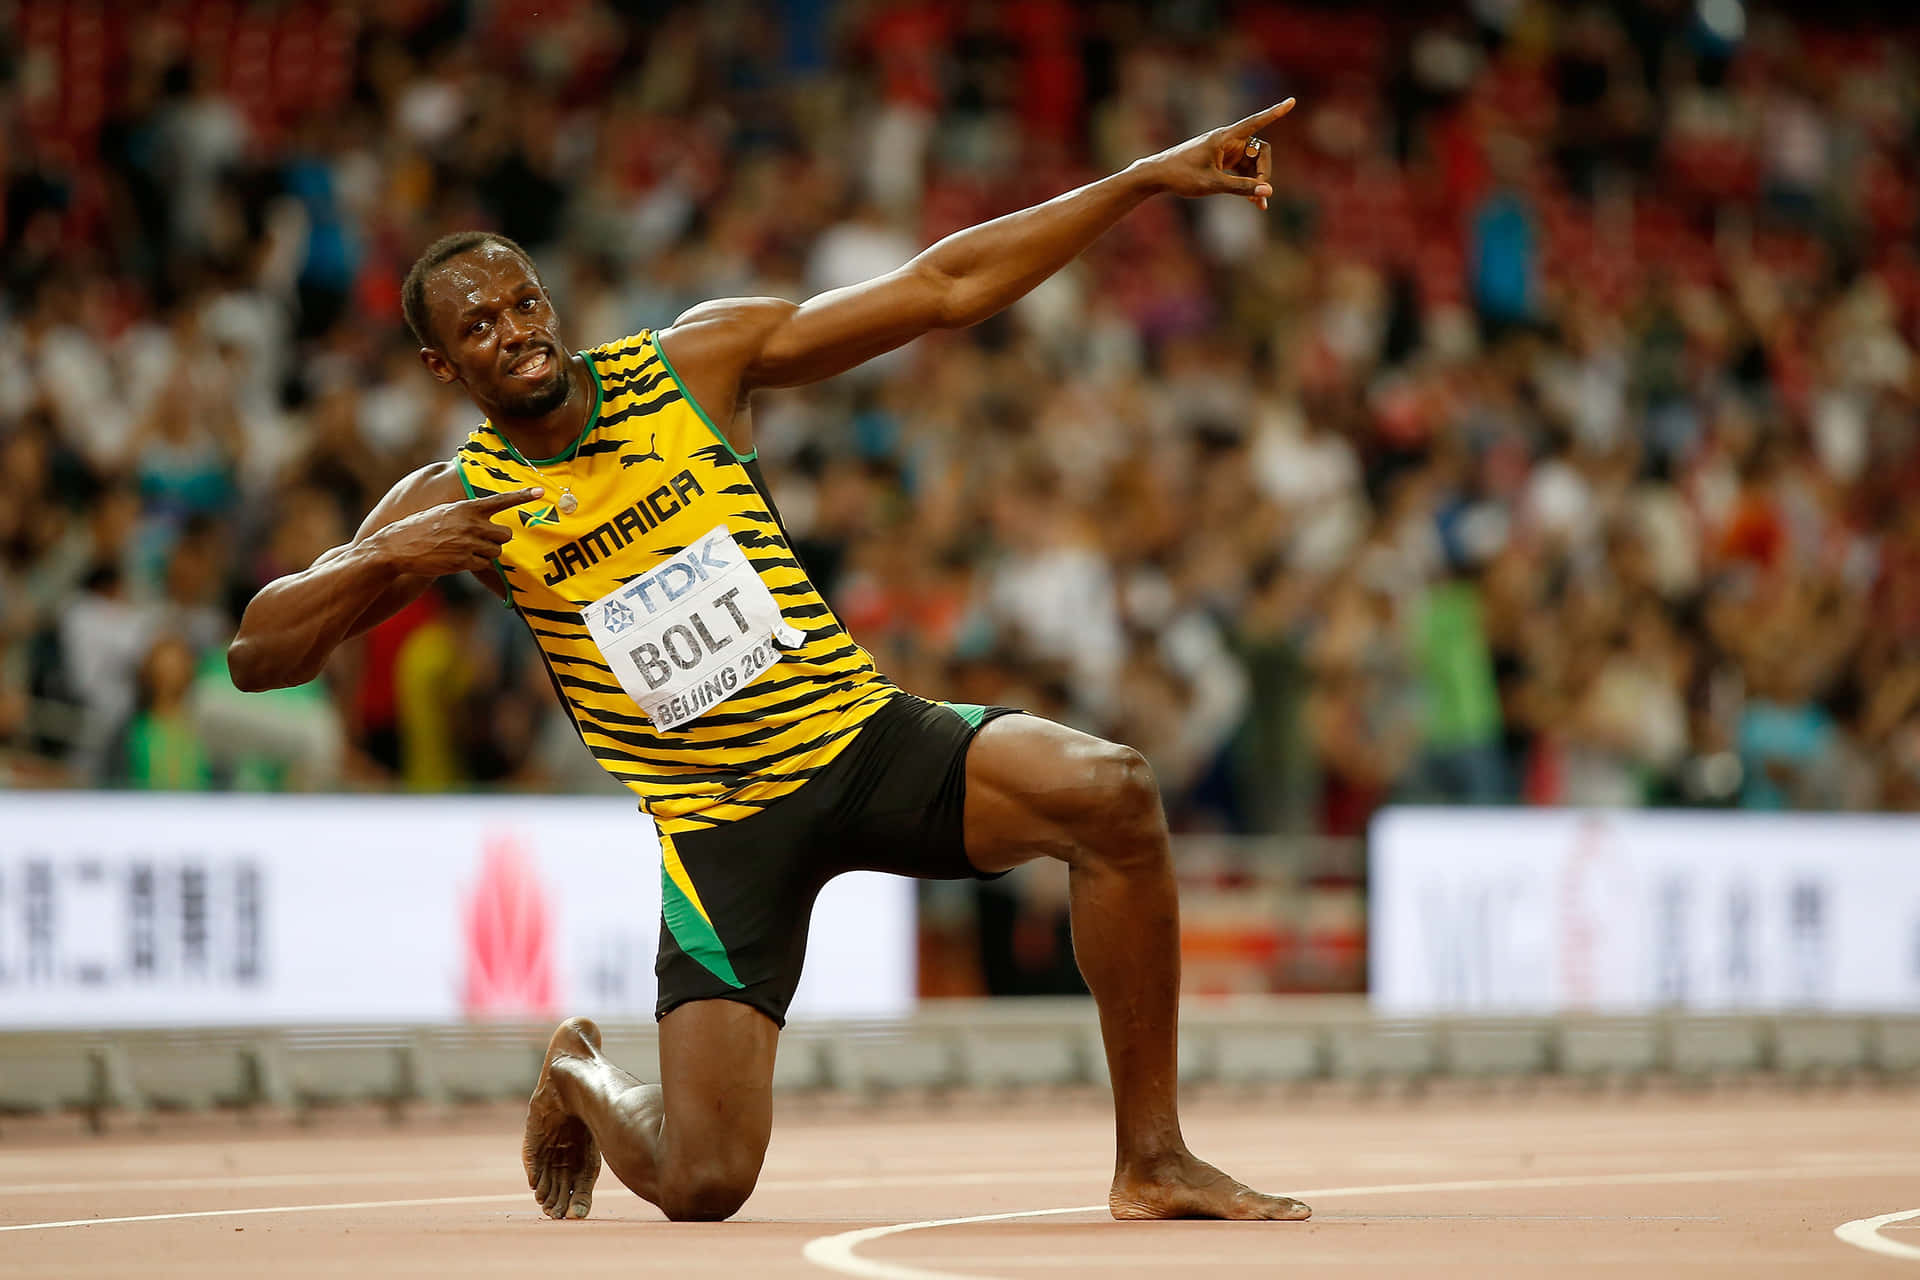 Perfect Usain Bolt Pose Wallpaper Amazing Free Hd Wallpapers Collection You  Can Download Best Desktop Backgrounds Windows Wallpapers Pc In Both  Widescreen Chez Lounge Furniture Usain Bolt  Imágenes españoles